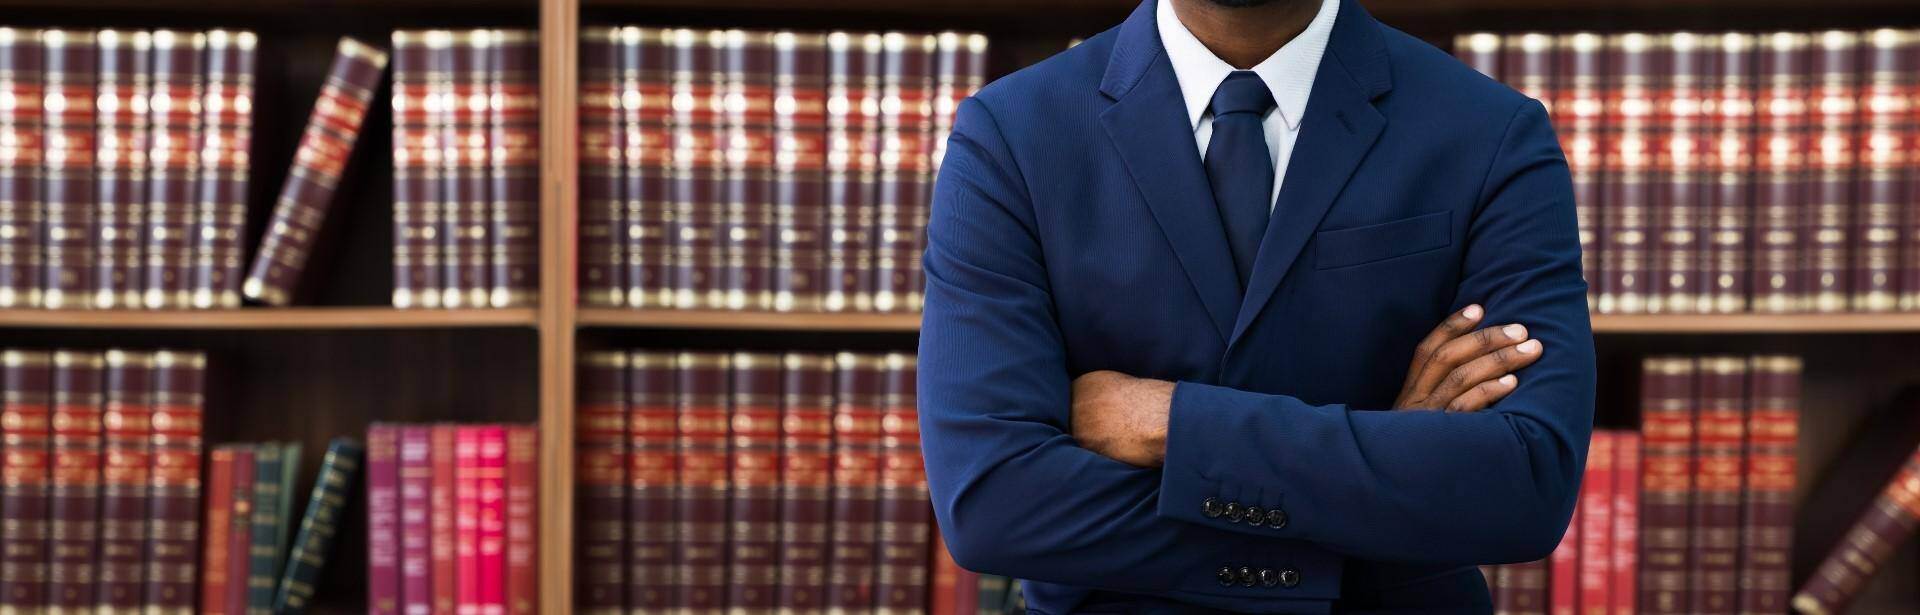 A black lawyer standing in front of a bookshelf of law book in Dunwoody, Georgia